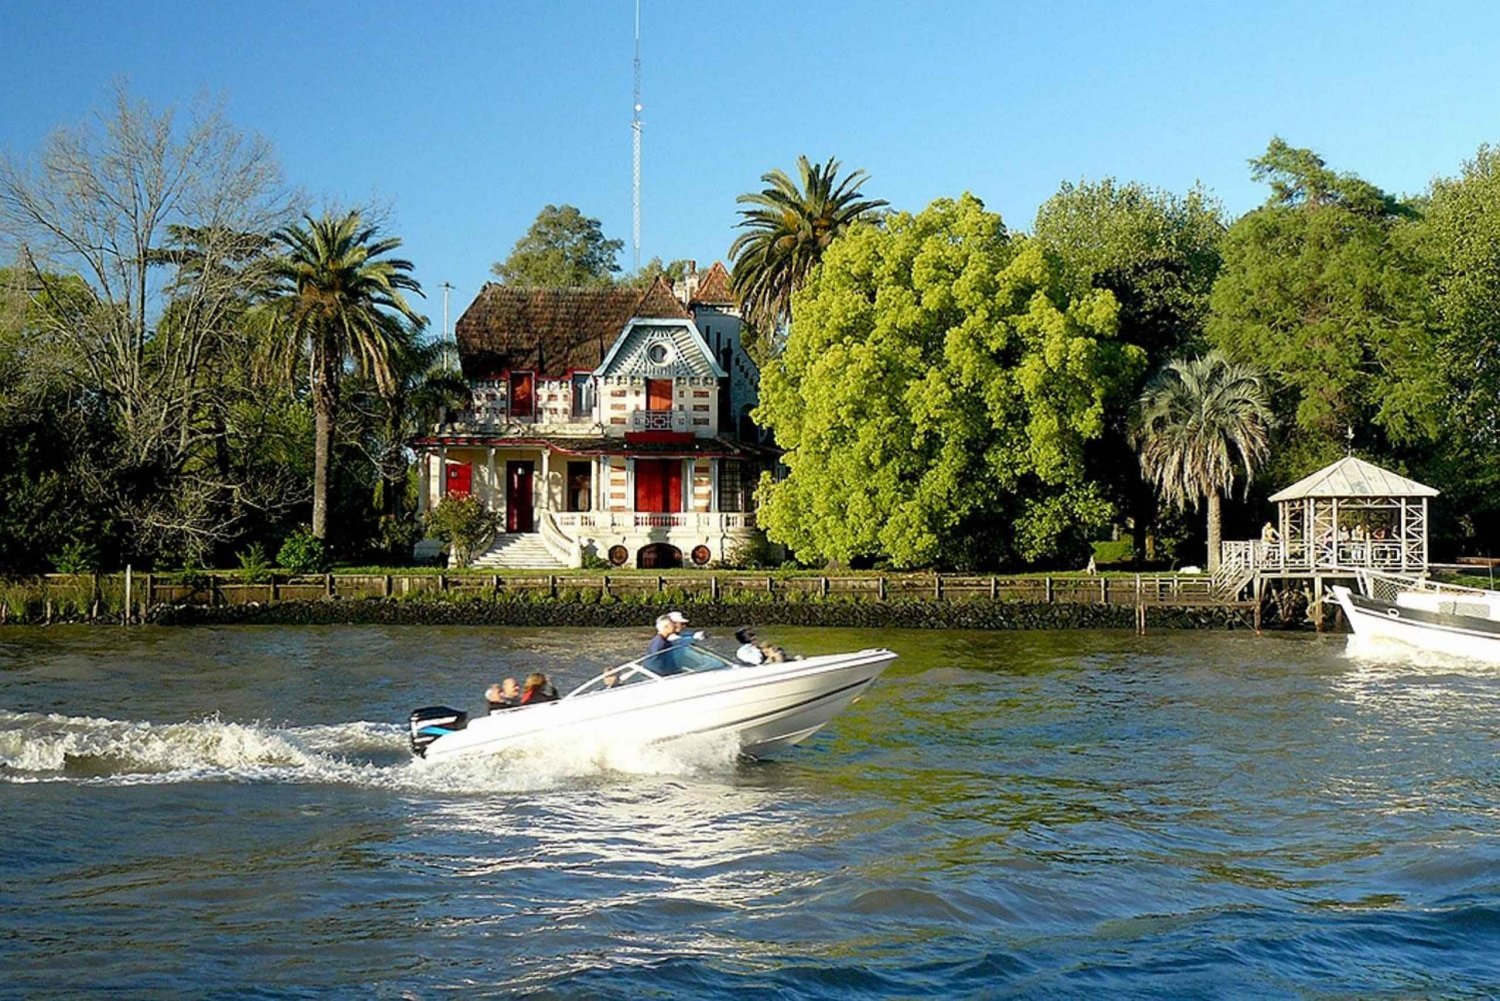 Tigre Full Day Tour with lunch in Tigre and return sailing